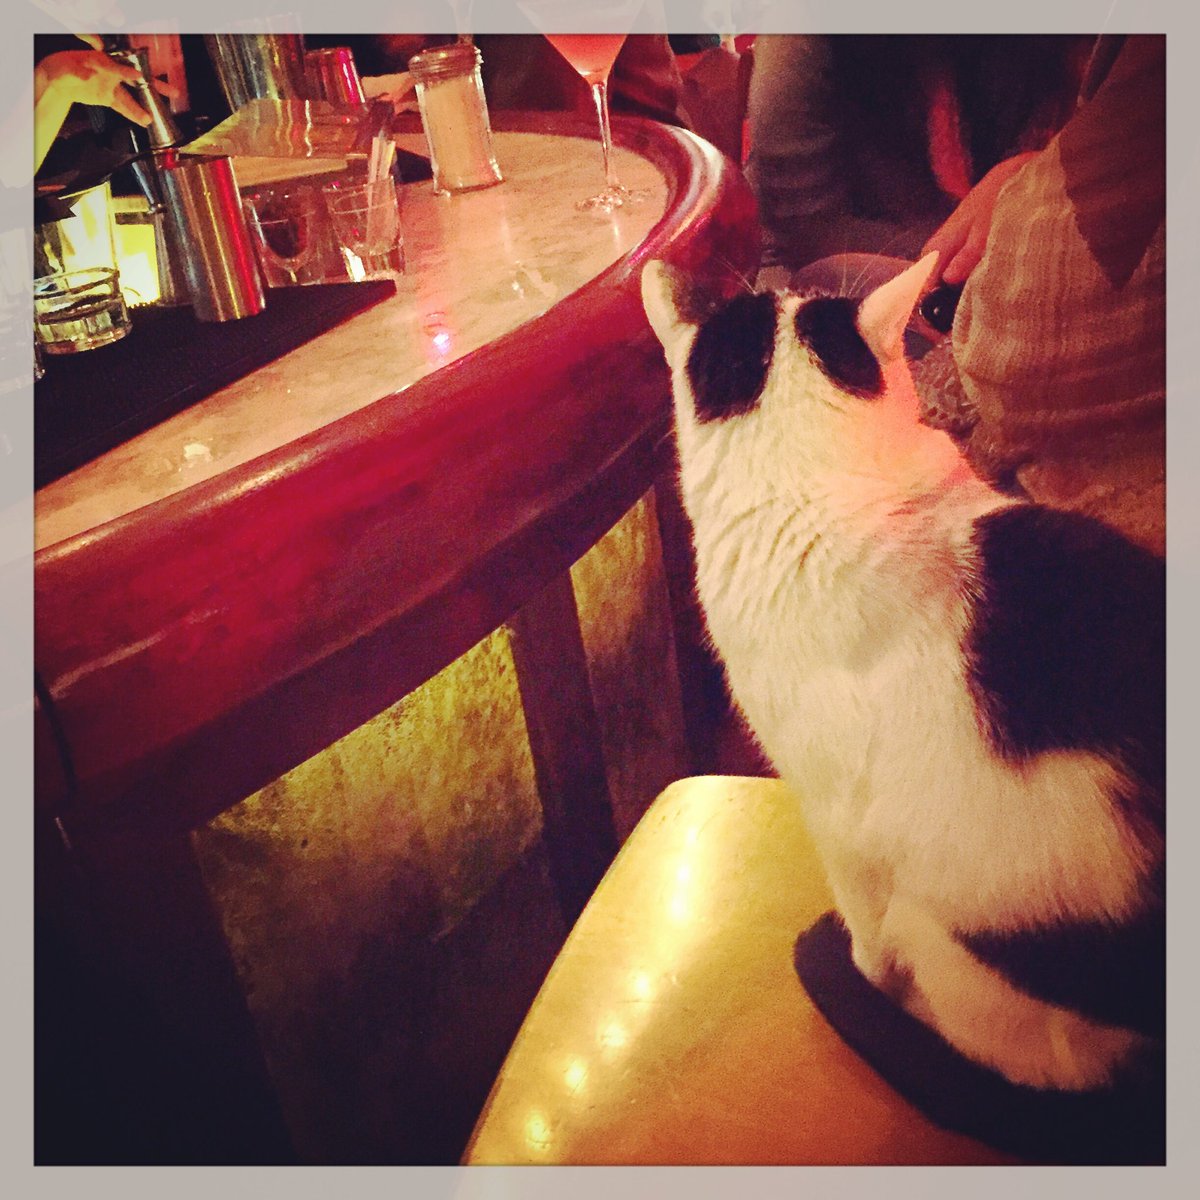 ⁦@baroffbroadway⁩ My fav moment at your pub was finding a drinking buddy who was a cat. Dec 12th, 2015. Happy 10th anniversary, now where is my whiskey! #Xmaseve